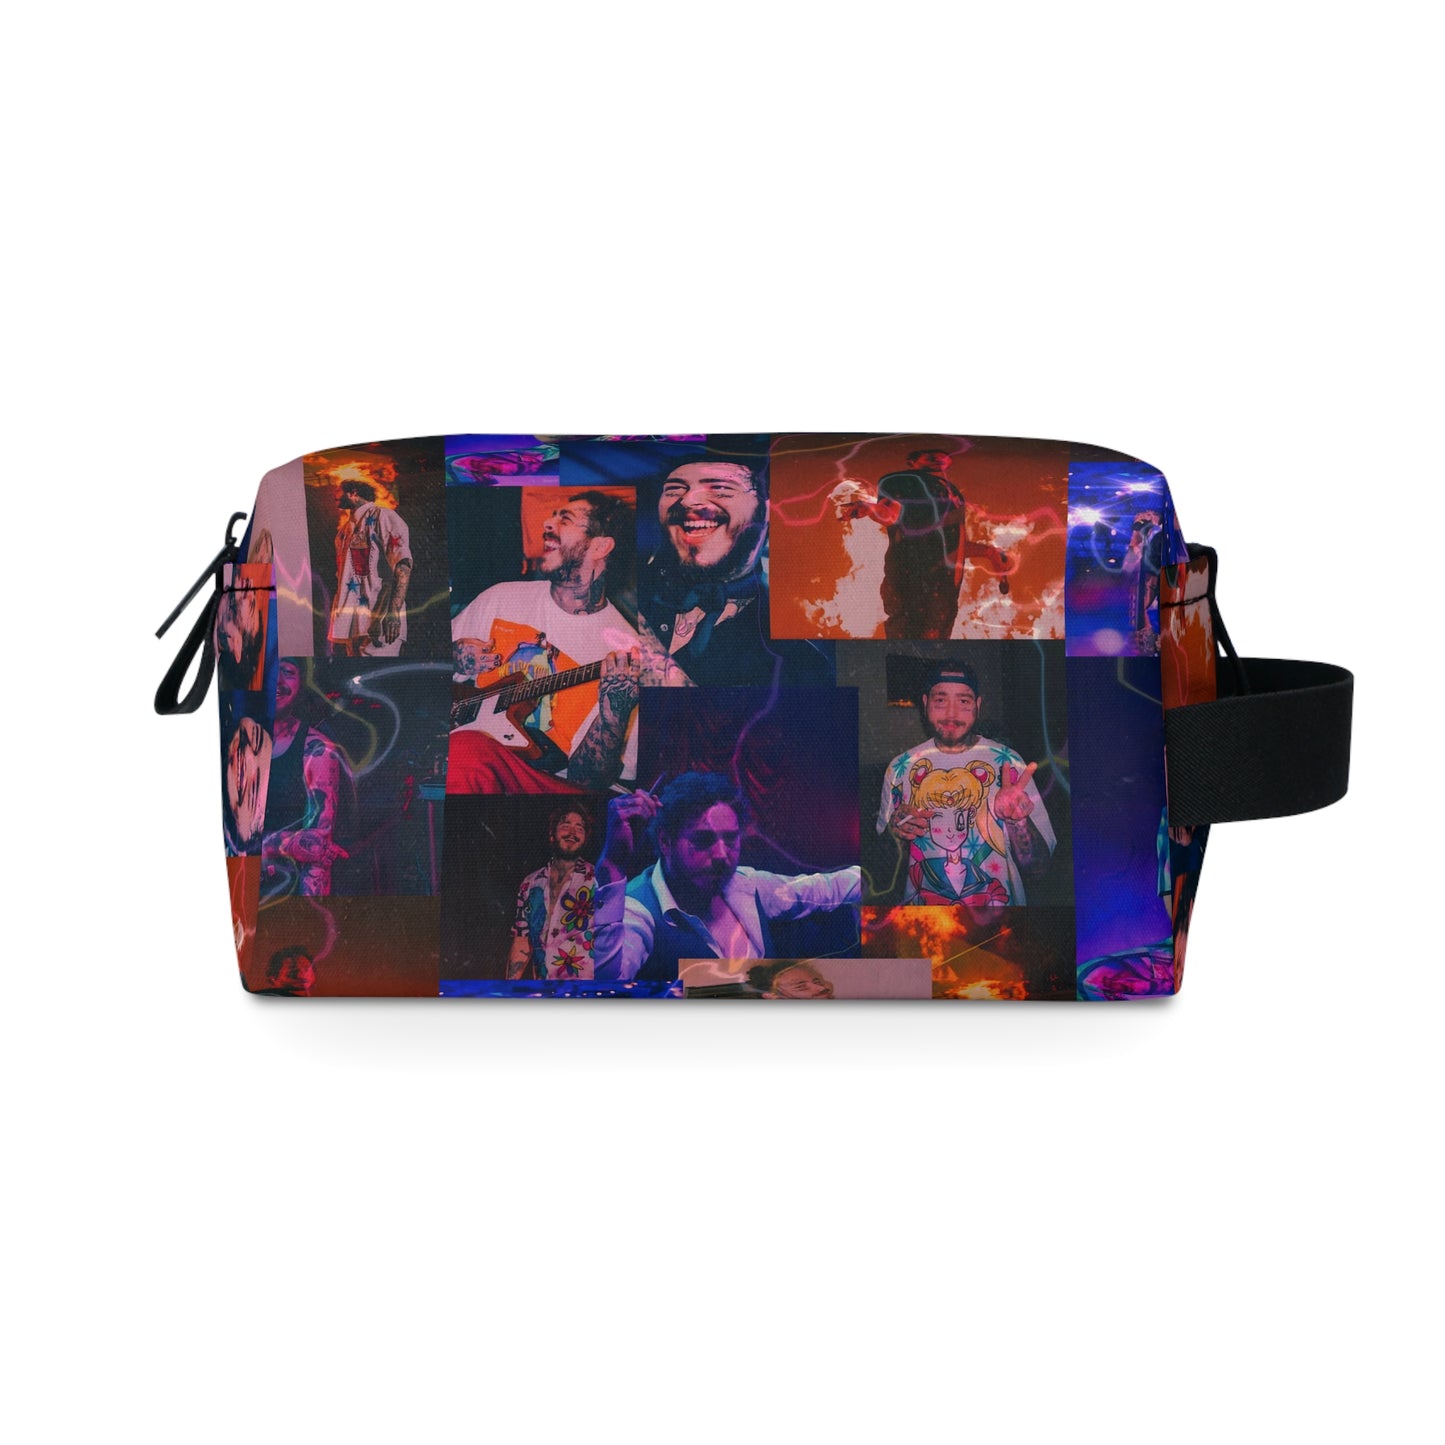 Post Malone Lightning Photo Collage Toiletry Bag